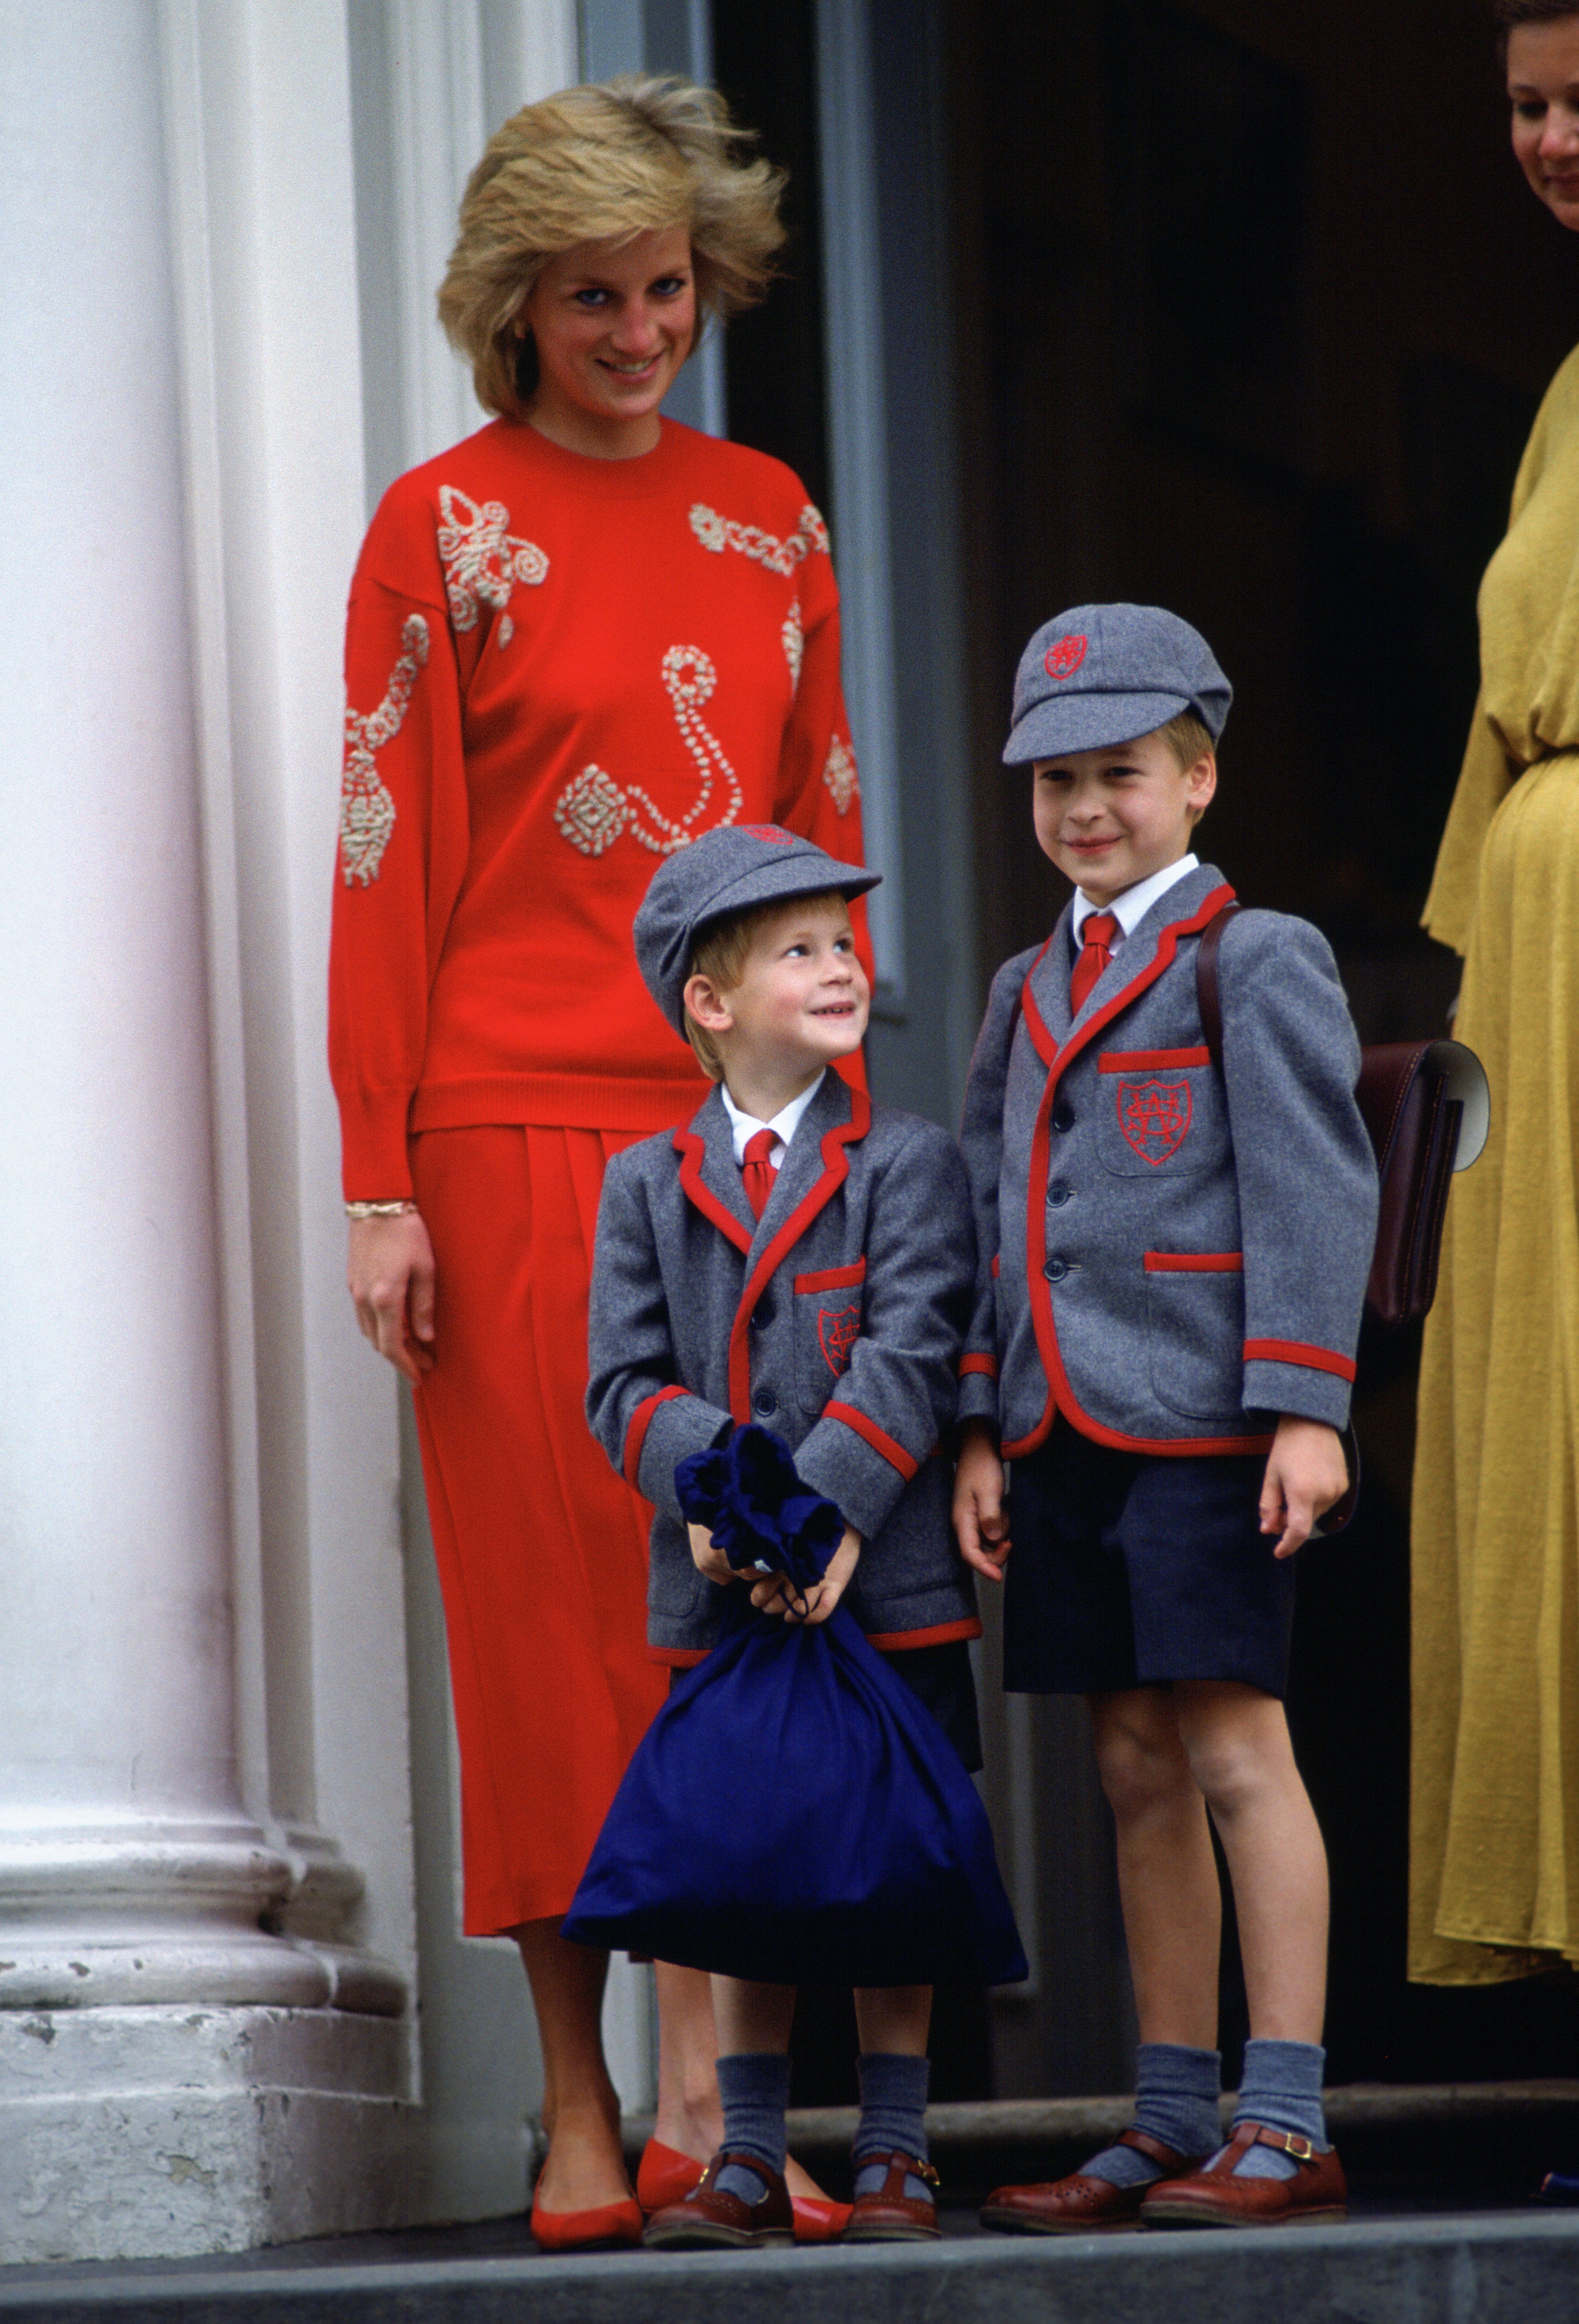 Princess Diana and her sons Prince William and Prince Harry on Harry's first day of school at Wetherby School, September, 1989. | Photo: Getty Images